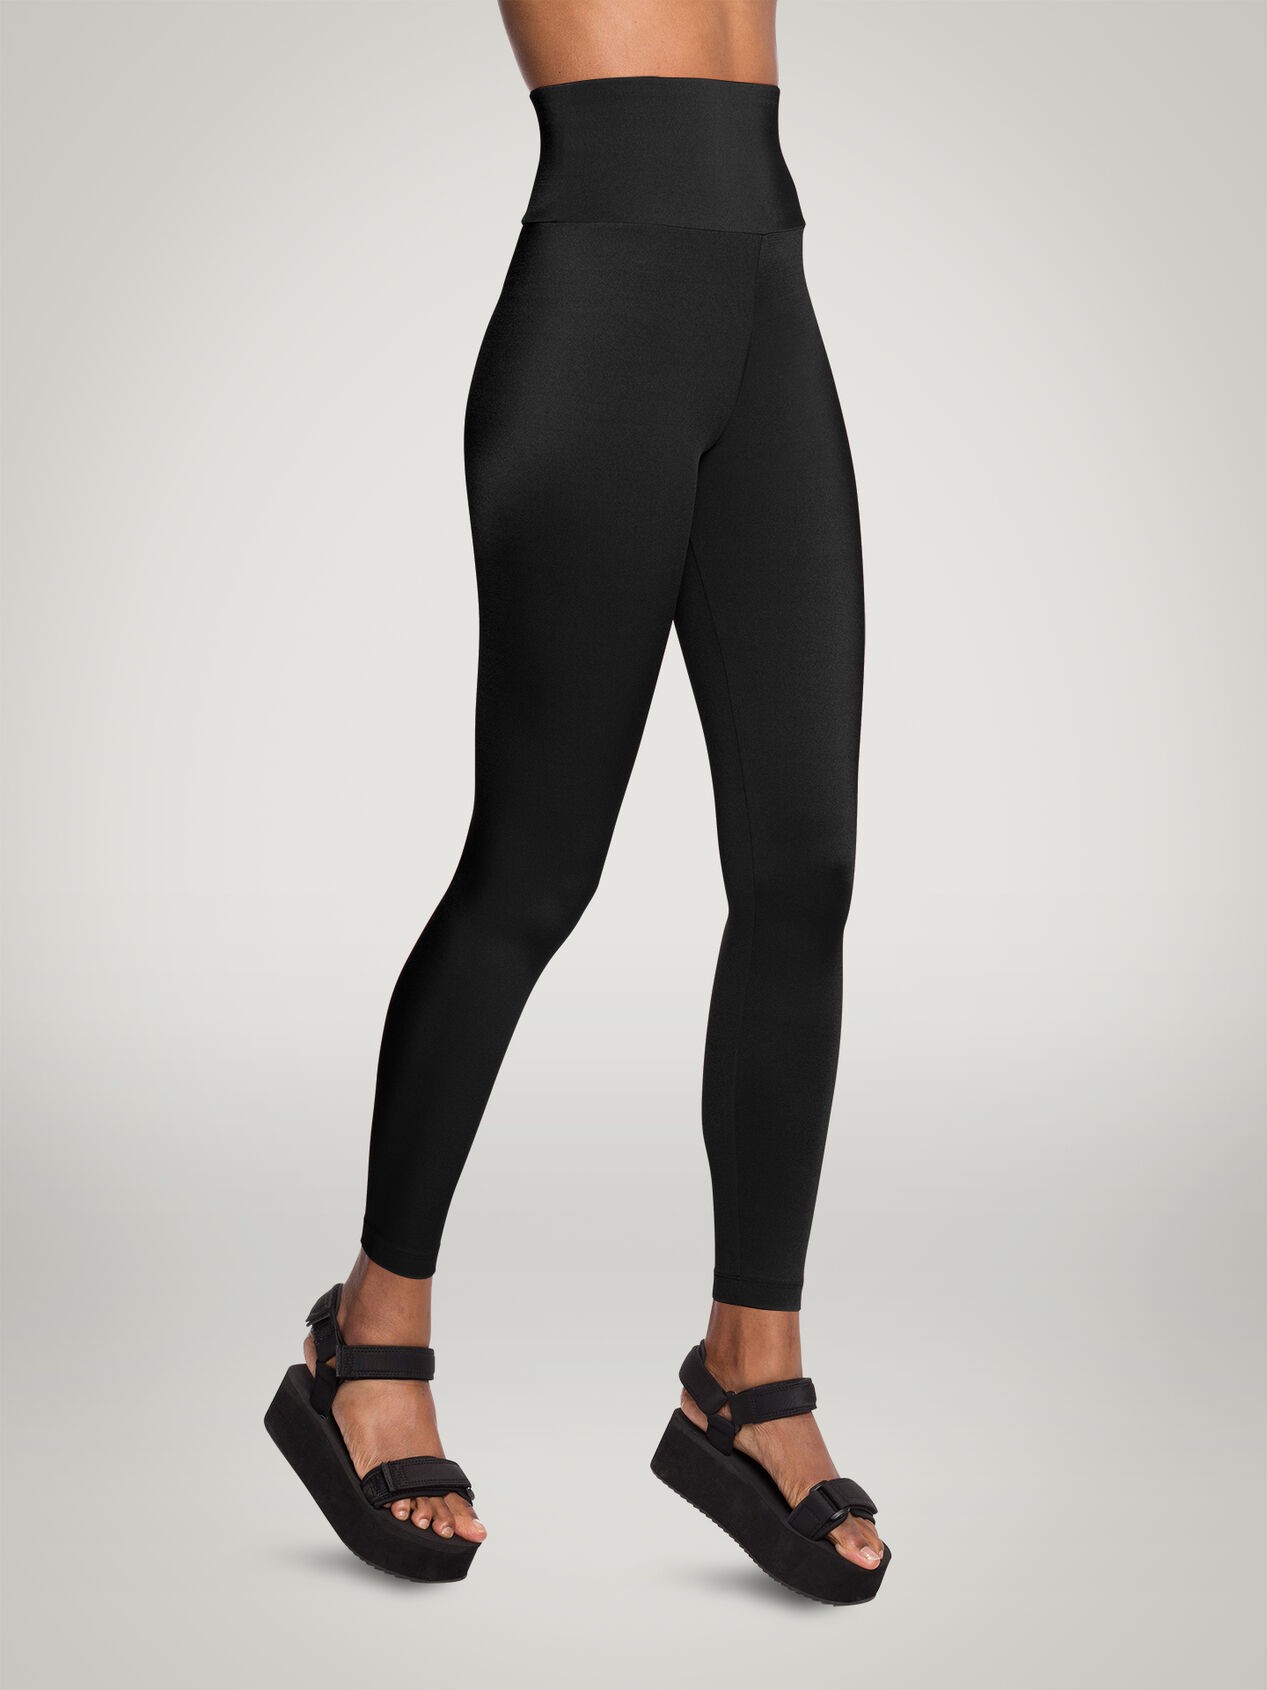 THE WORKOUT LEGGINGS